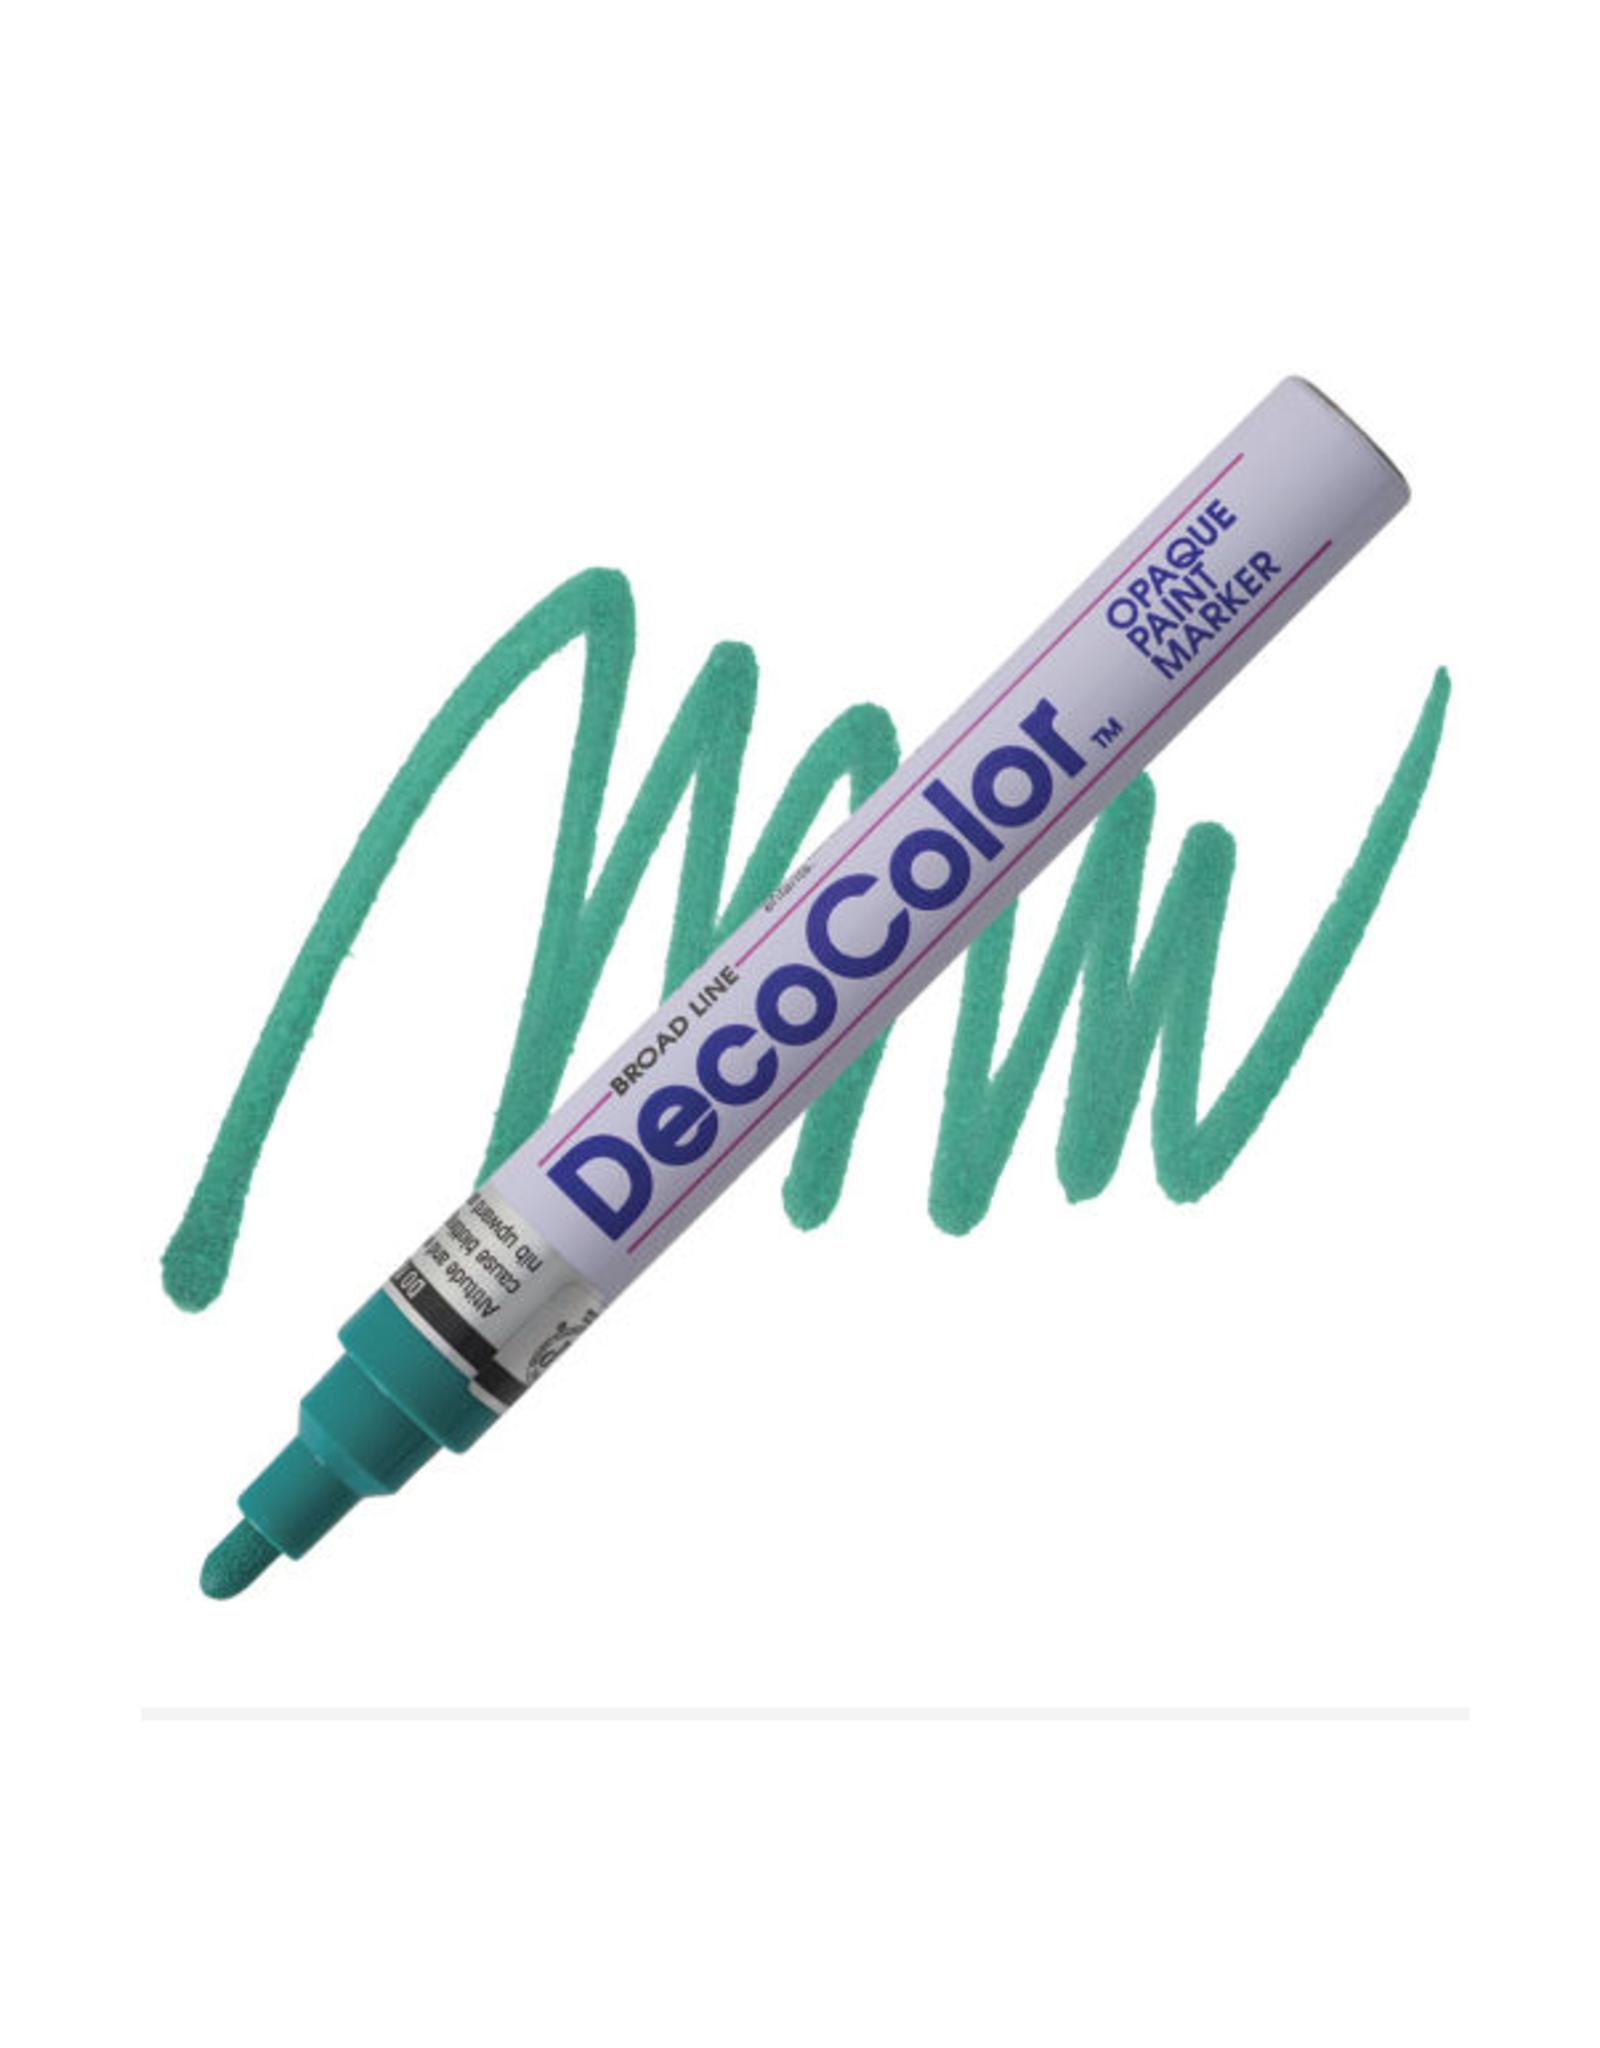 UCHIDA OF AMERICA CORP. DECOCOLOR PAINT MARKER BROAD TEAL